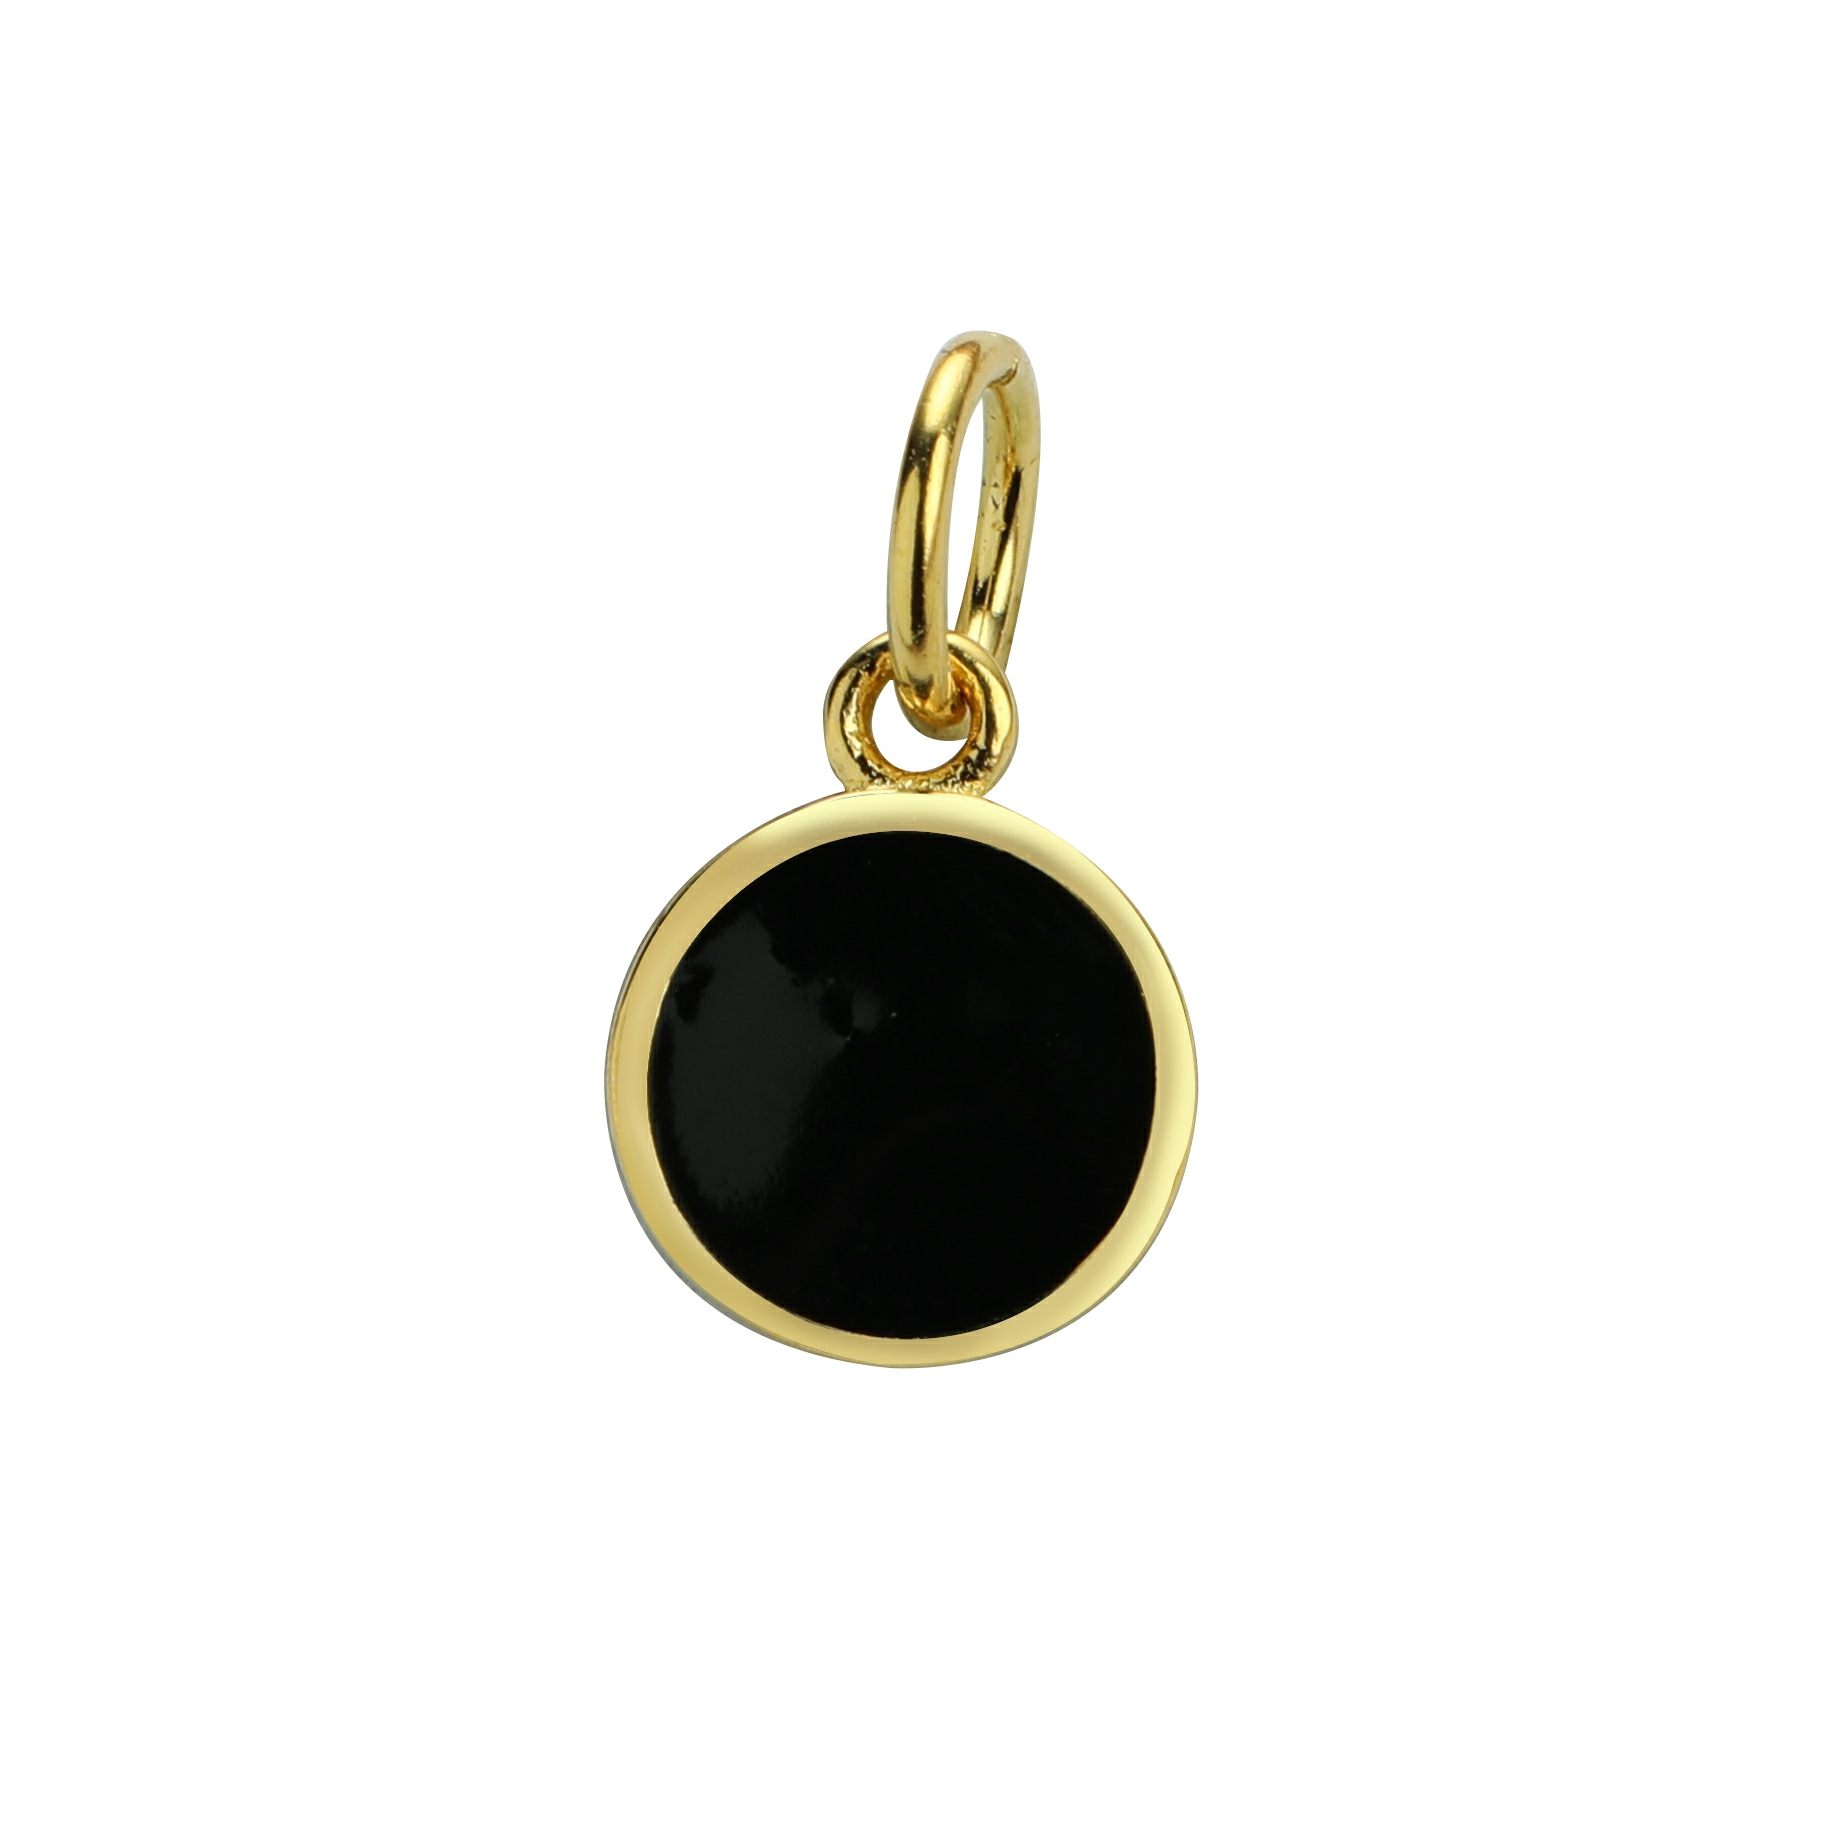 6MM Round Black Epoxy Charm,Solid 925 Sterling Silver Gold Plated Pendant Charm,DIY Charm Supplies 1431190 - Click Image to Close